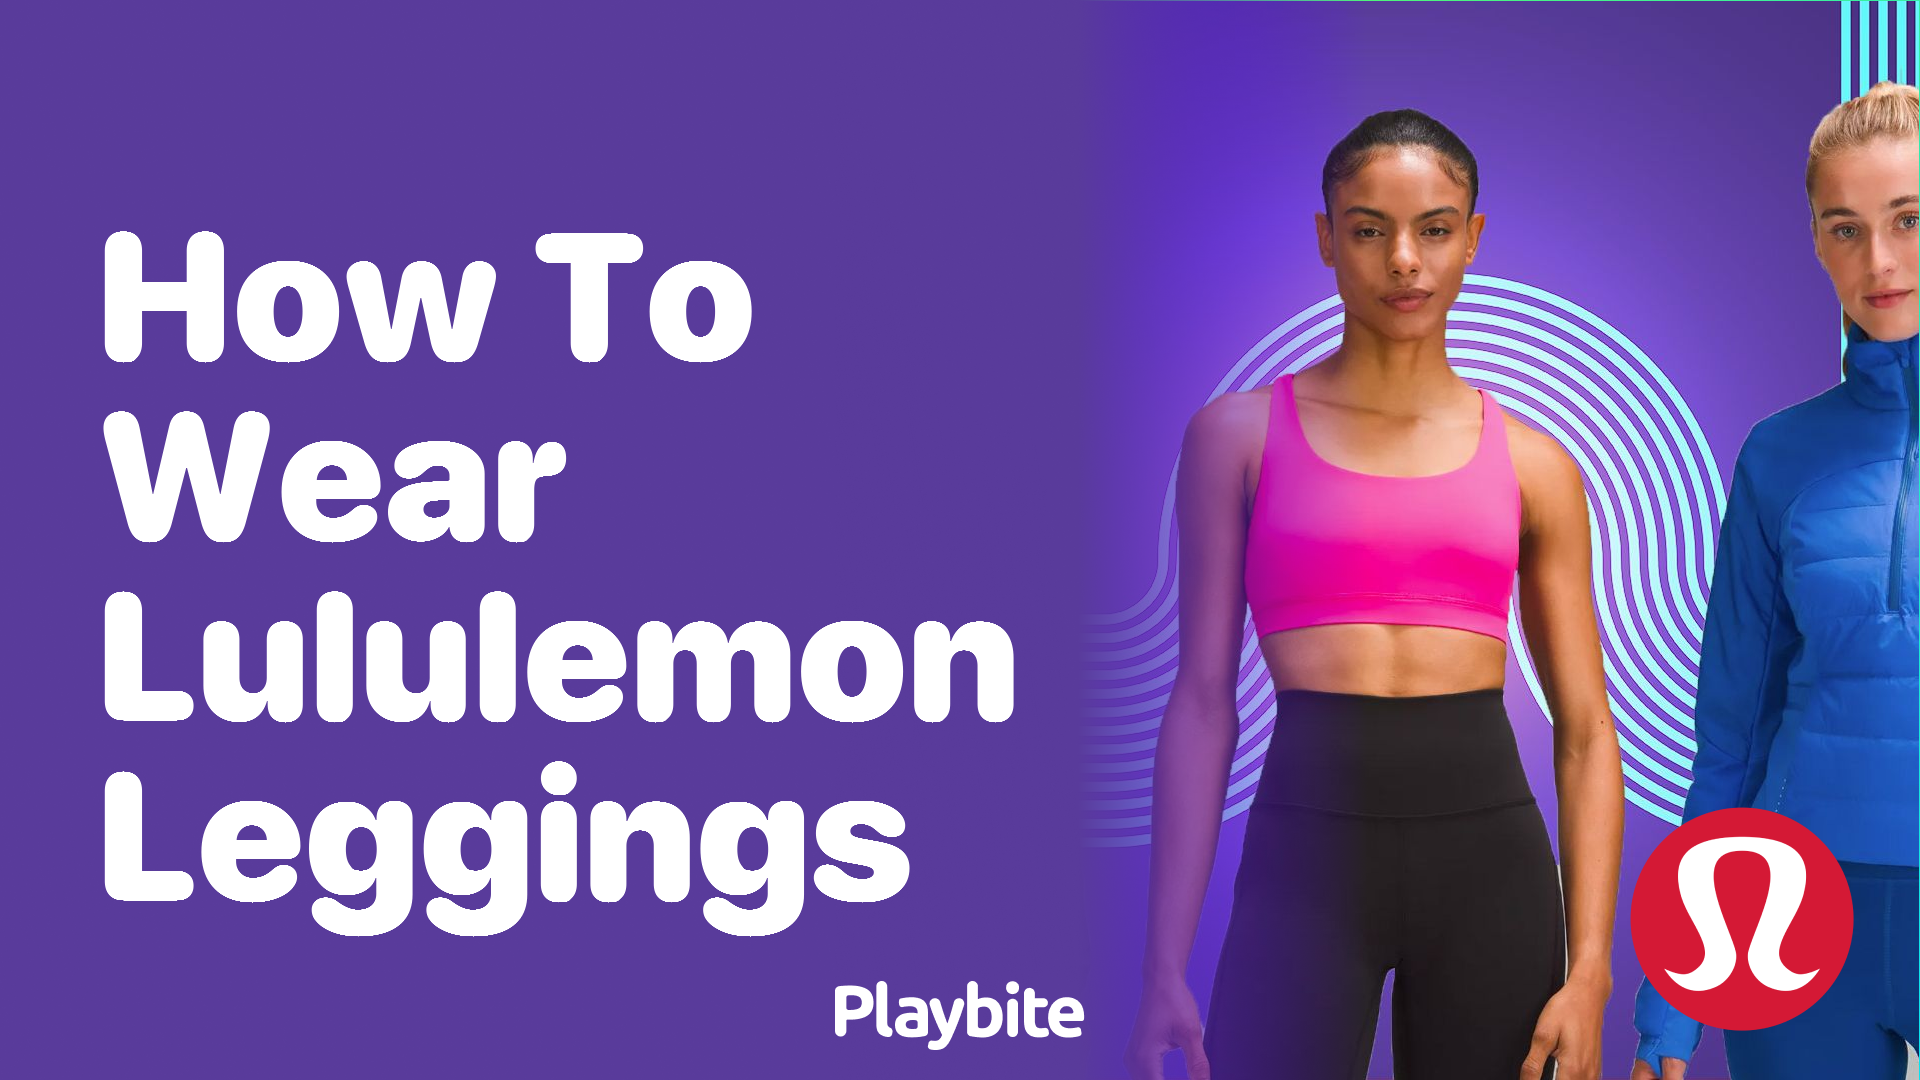 How to Wear Lululemon Leggings for Maximum Style and Comfort - Playbite